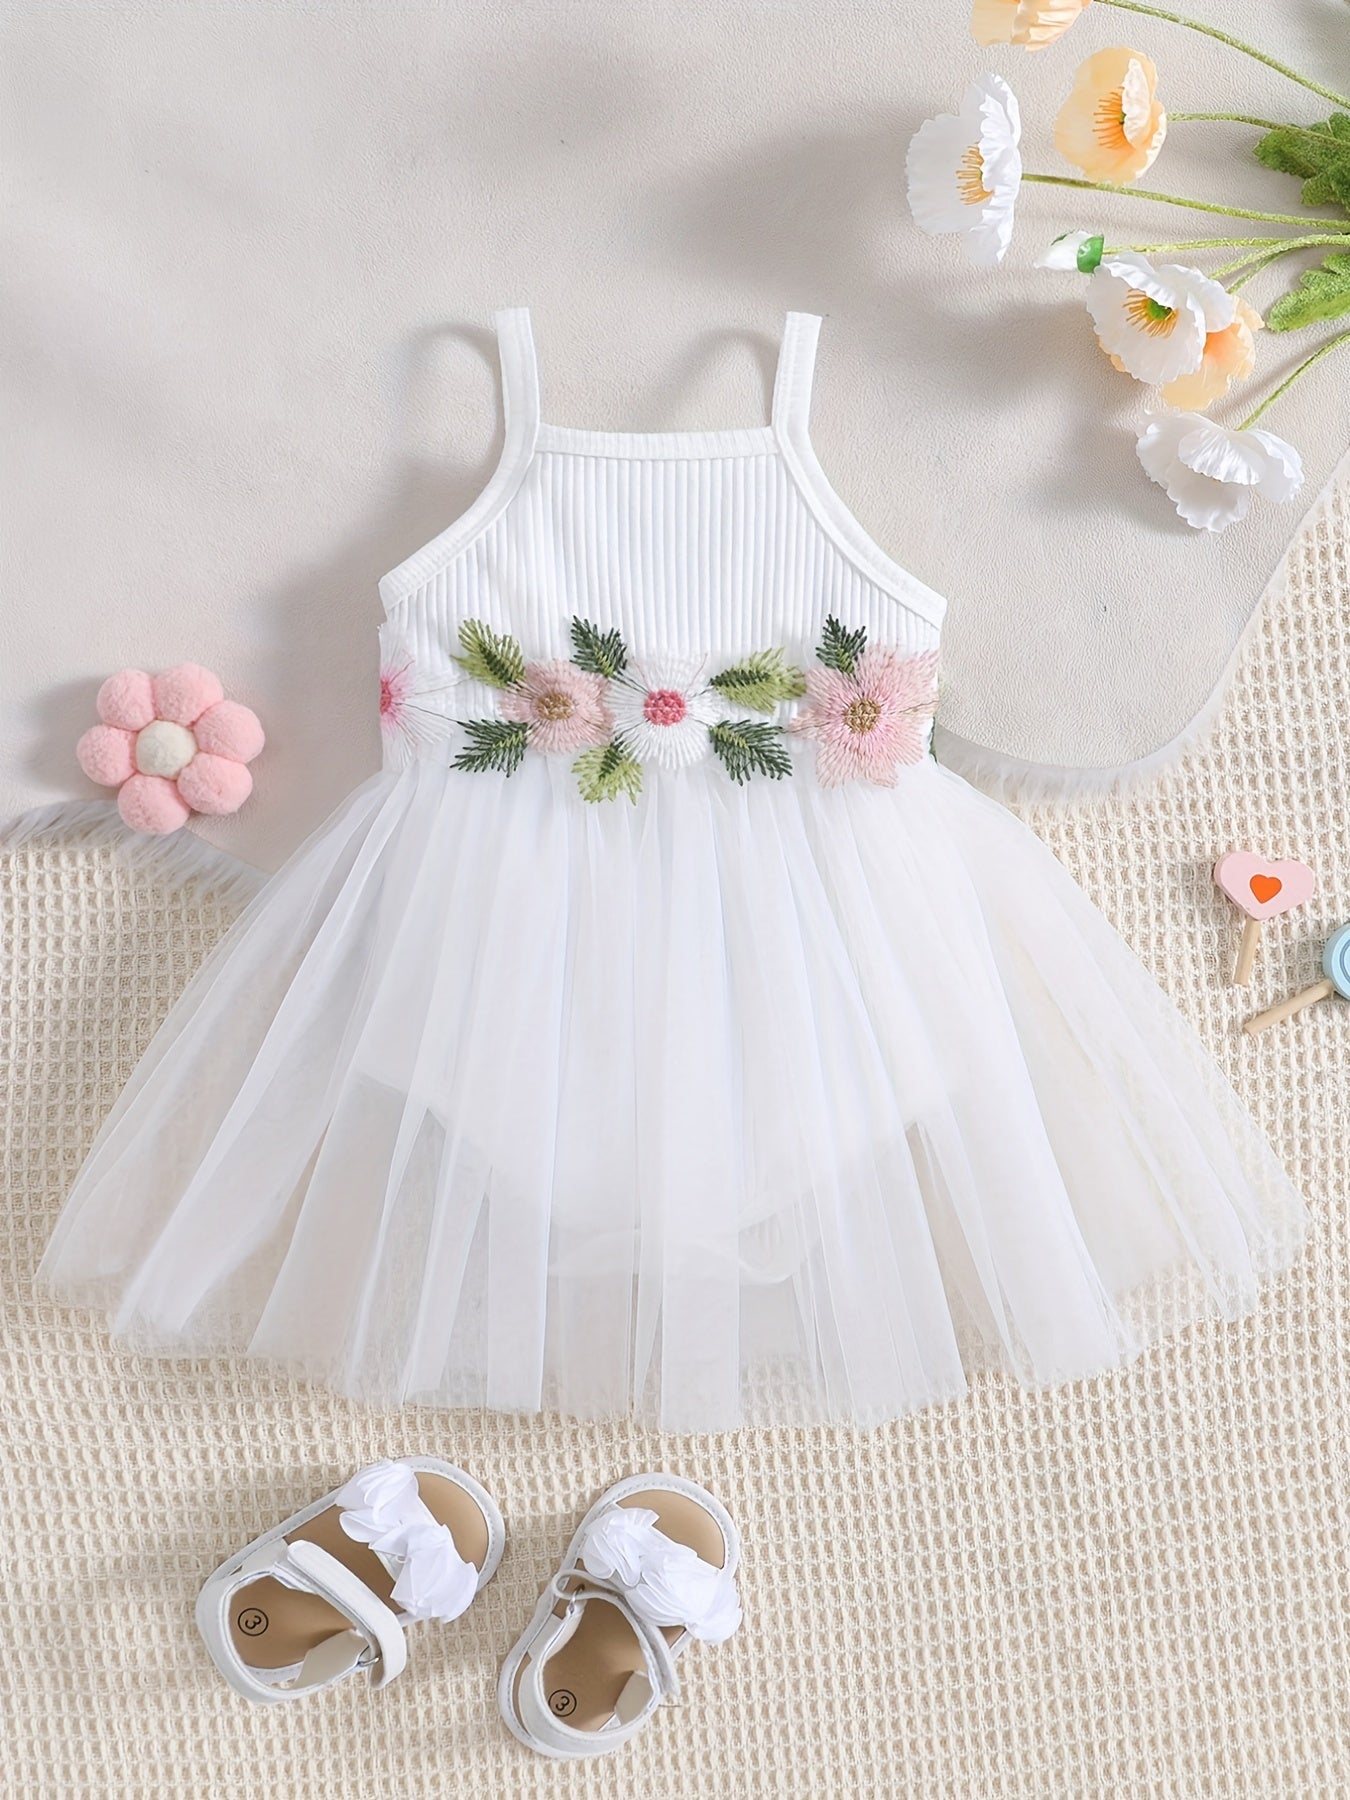 Baby Girl's Cute Floral Embroidery Sleeveless Mesh Cami Onesie Dress Clothes With Fashion Mesh Hem And Flower Decors